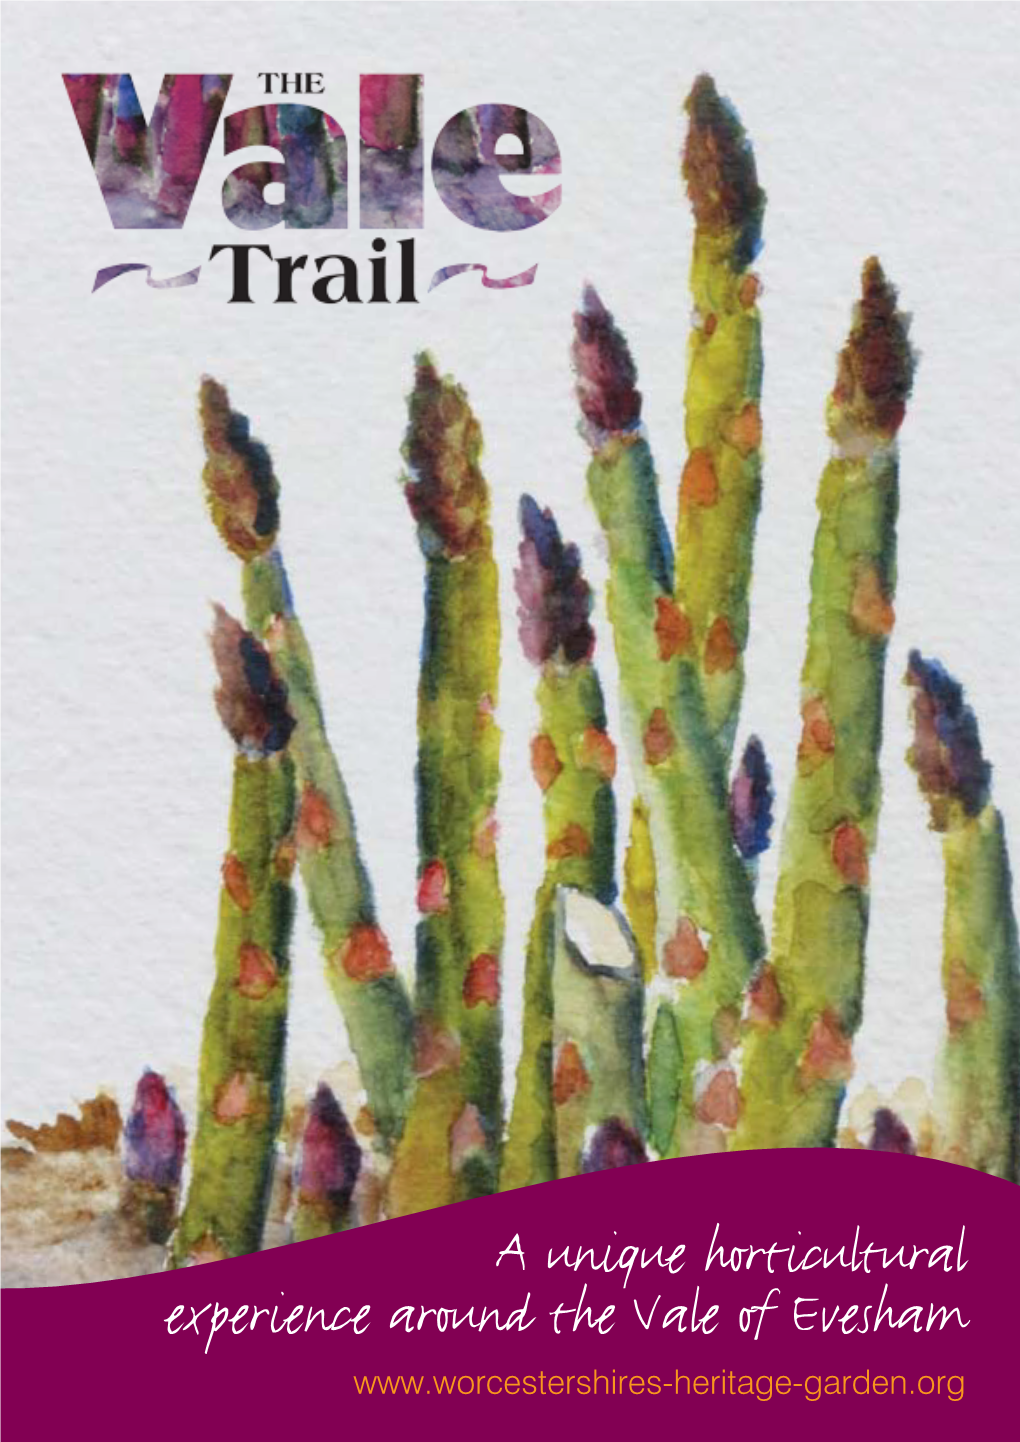 A Unique Horticultural Experience Around the Vale of Evesham About the Vale Trail